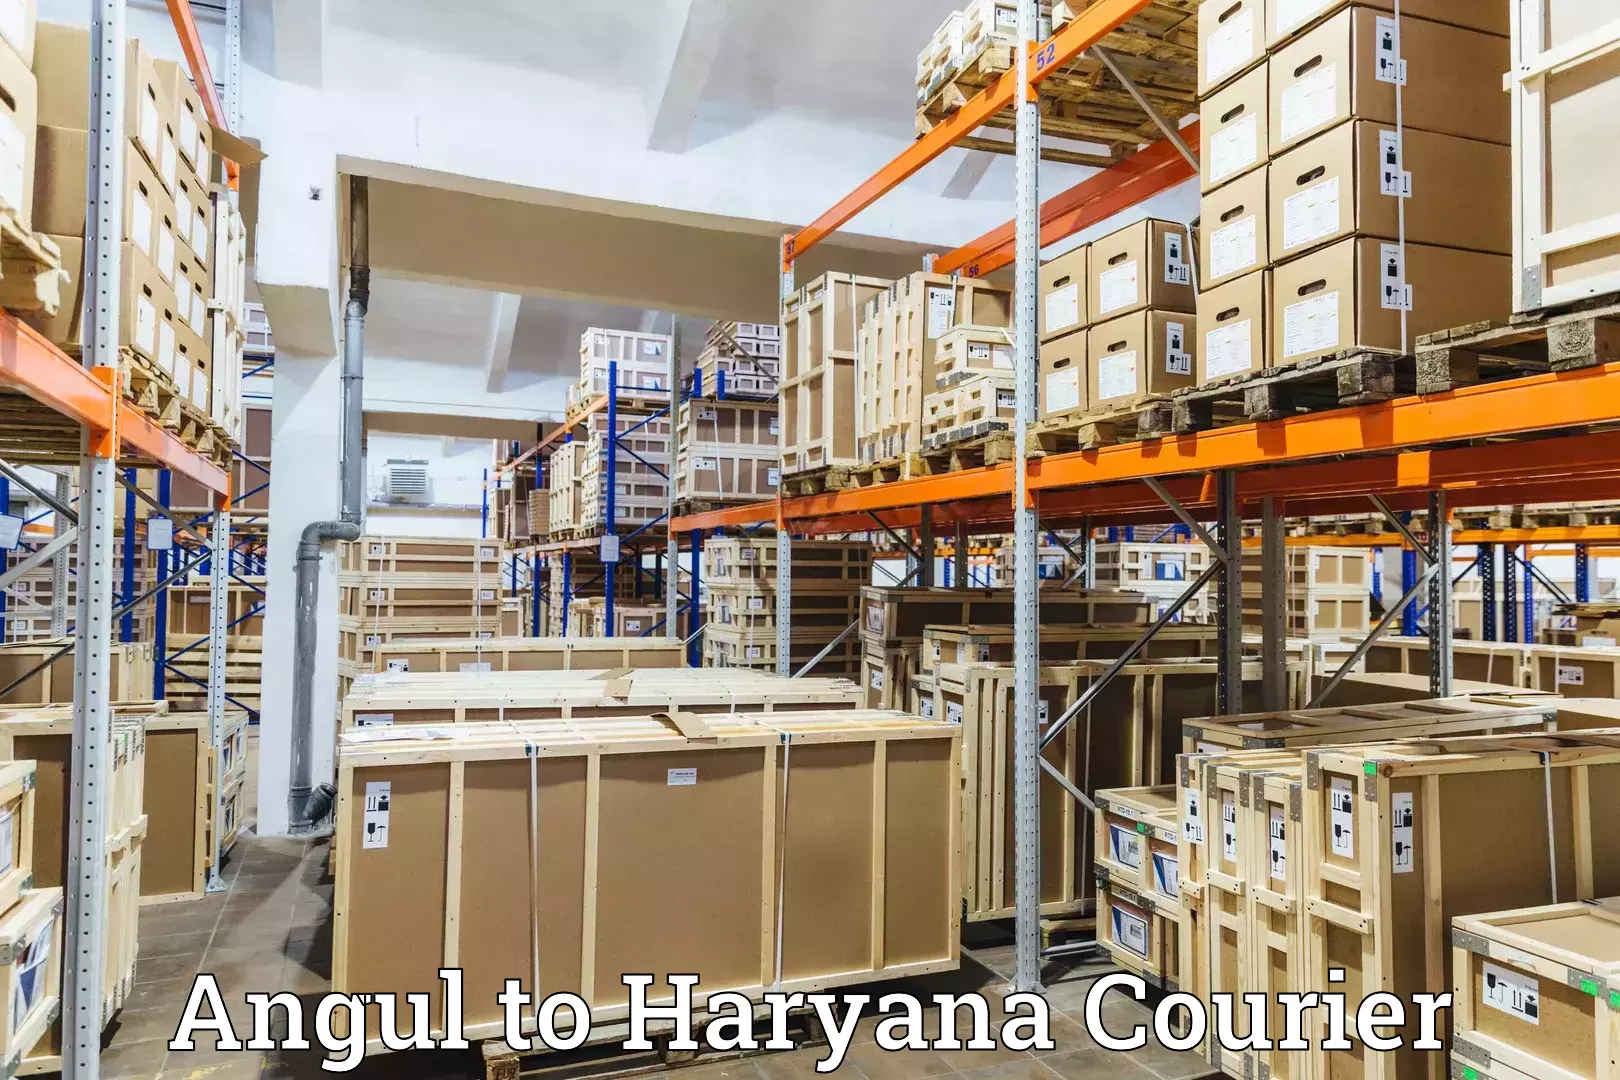 Courier tracking online Angul to Gurugram